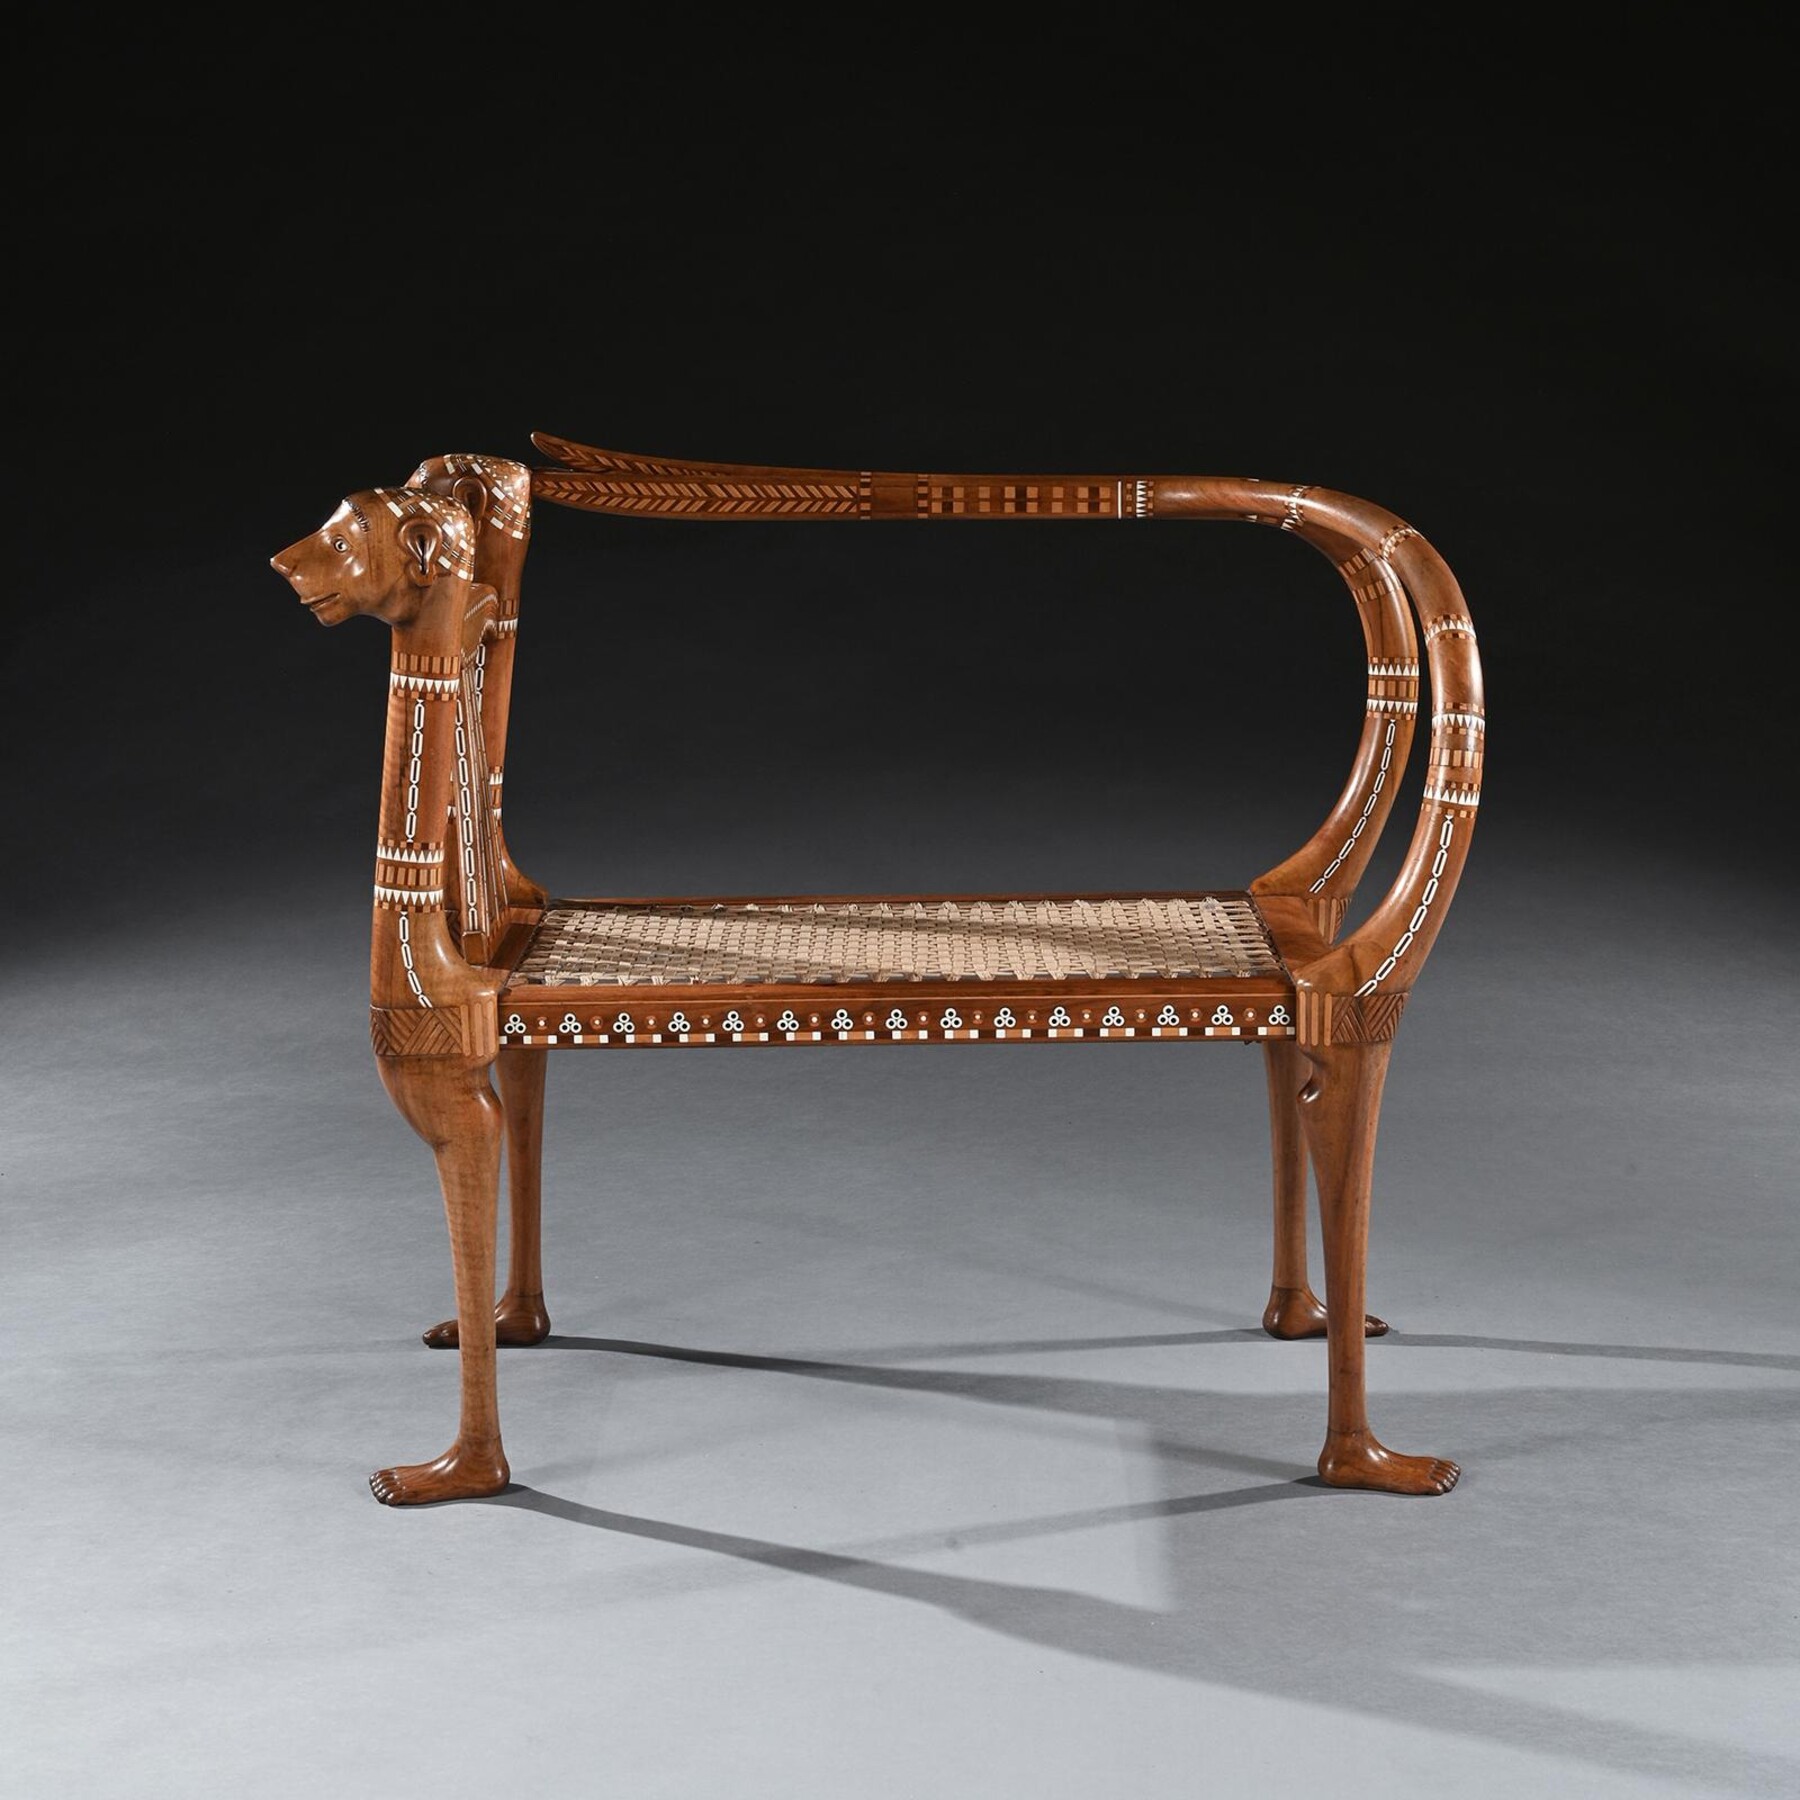 An Extremely Rare Exhibition Quality Egyptian Revival Walnut and Inlaid Bench or Window Seat